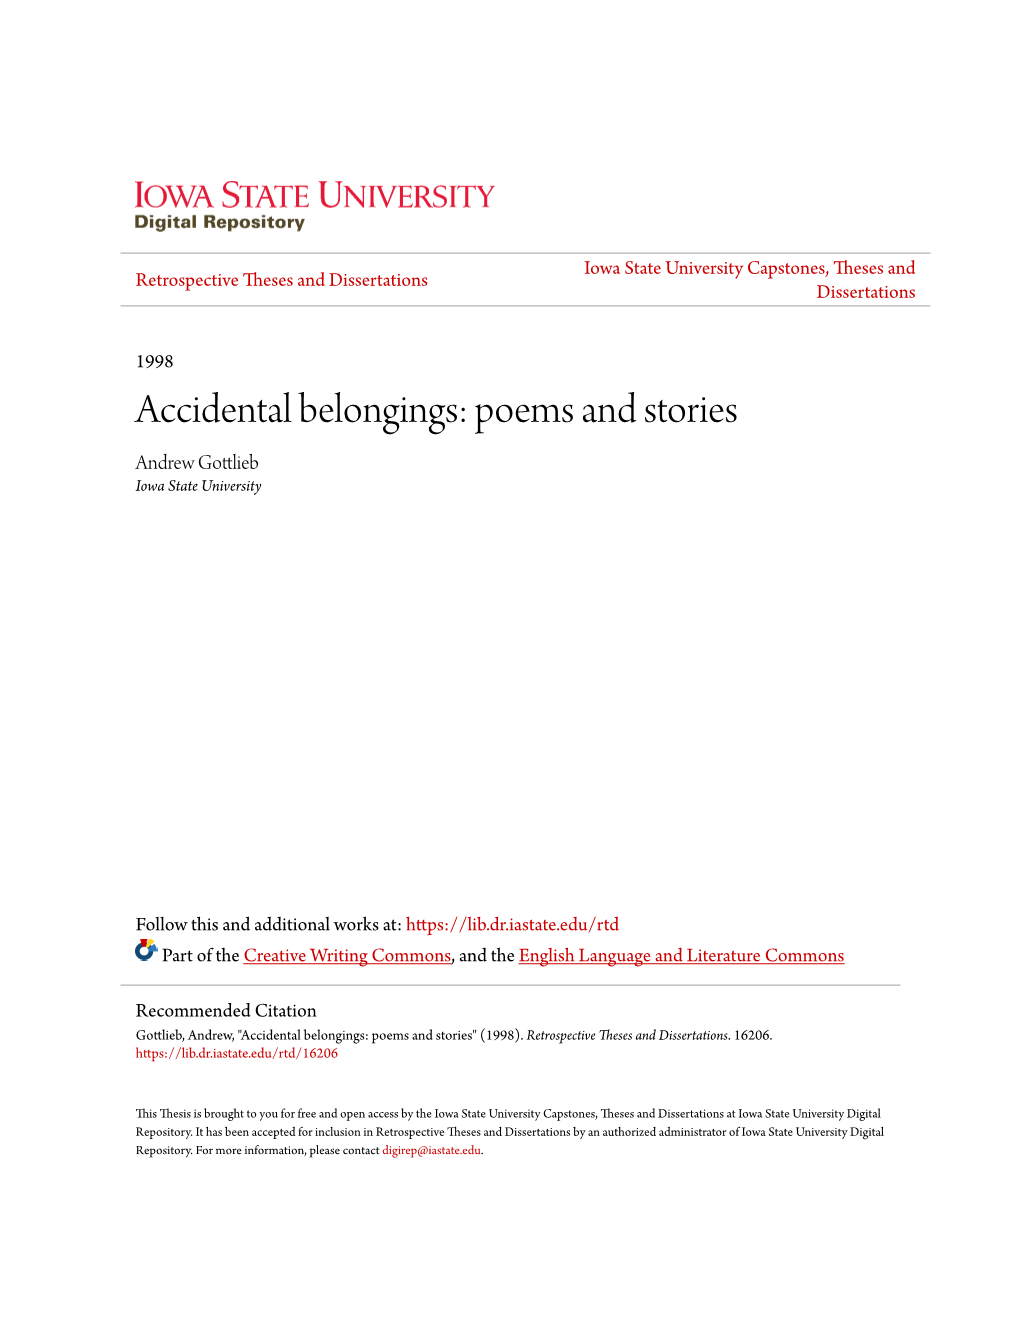 Accidental Belongings: Poems and Stories Andrew Gottlieb Iowa State University